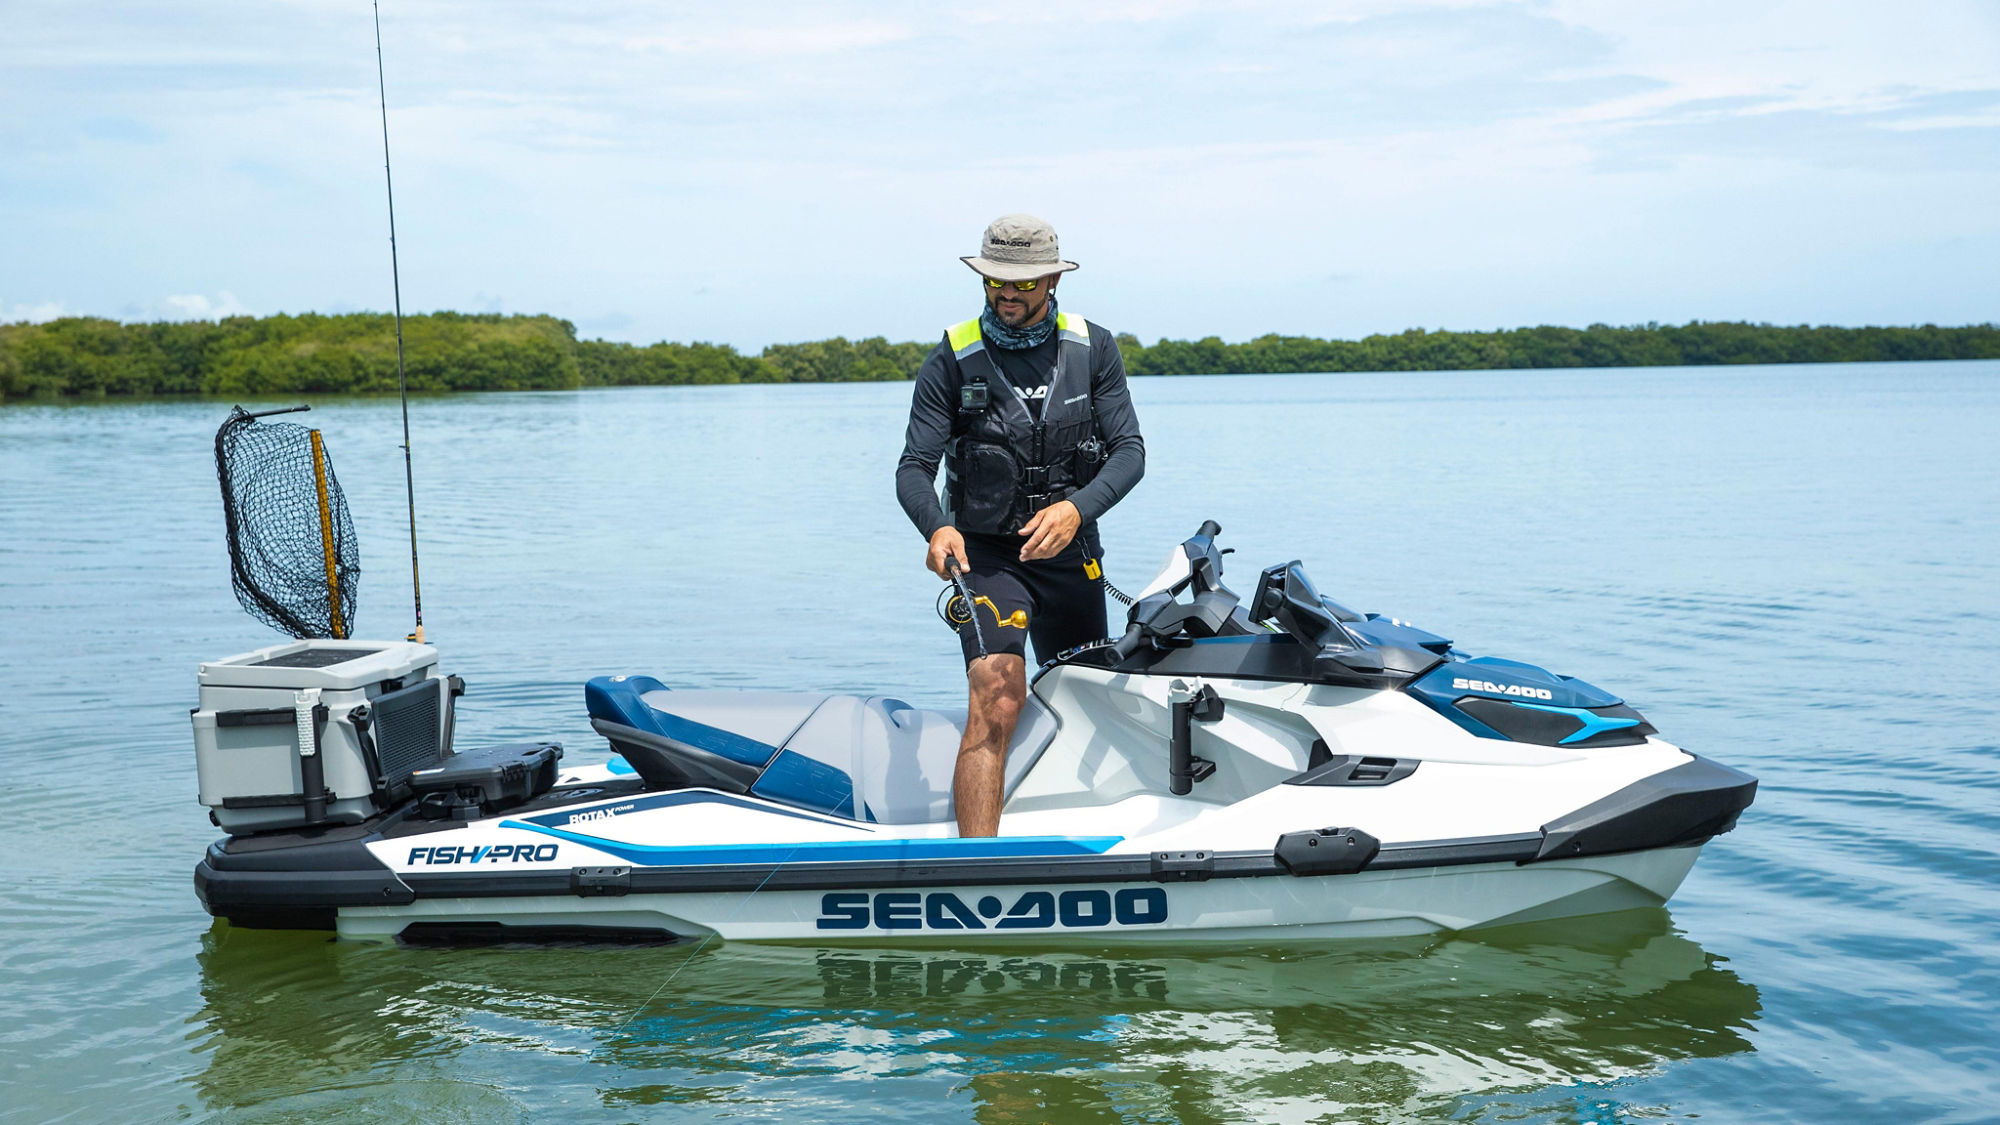 Fishing Gear for Jet Skis